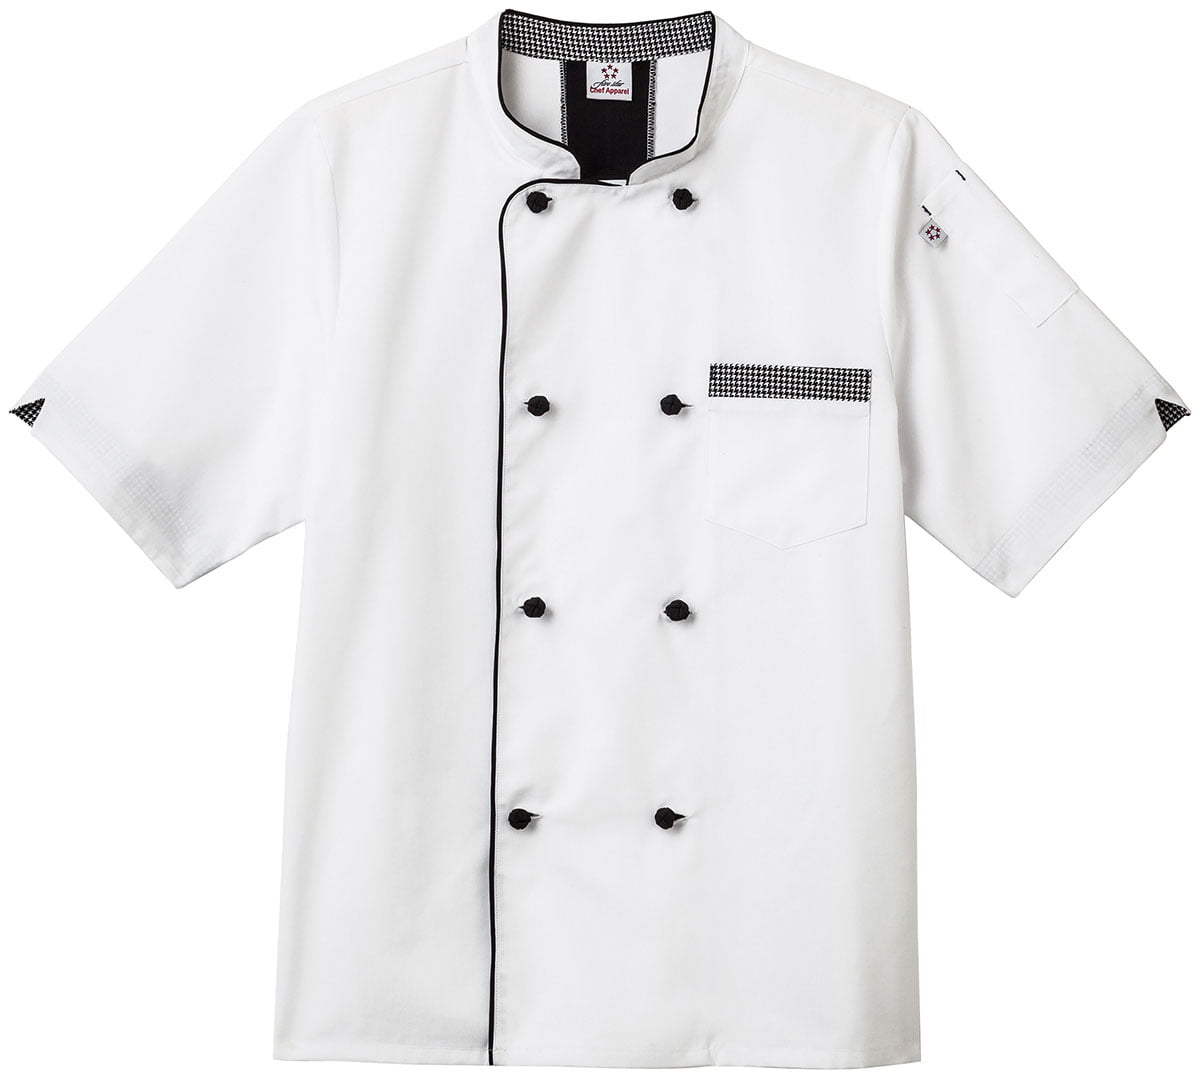 Five Star Short Sleeve Chef Jacket Available Different Colors for Unisex. 